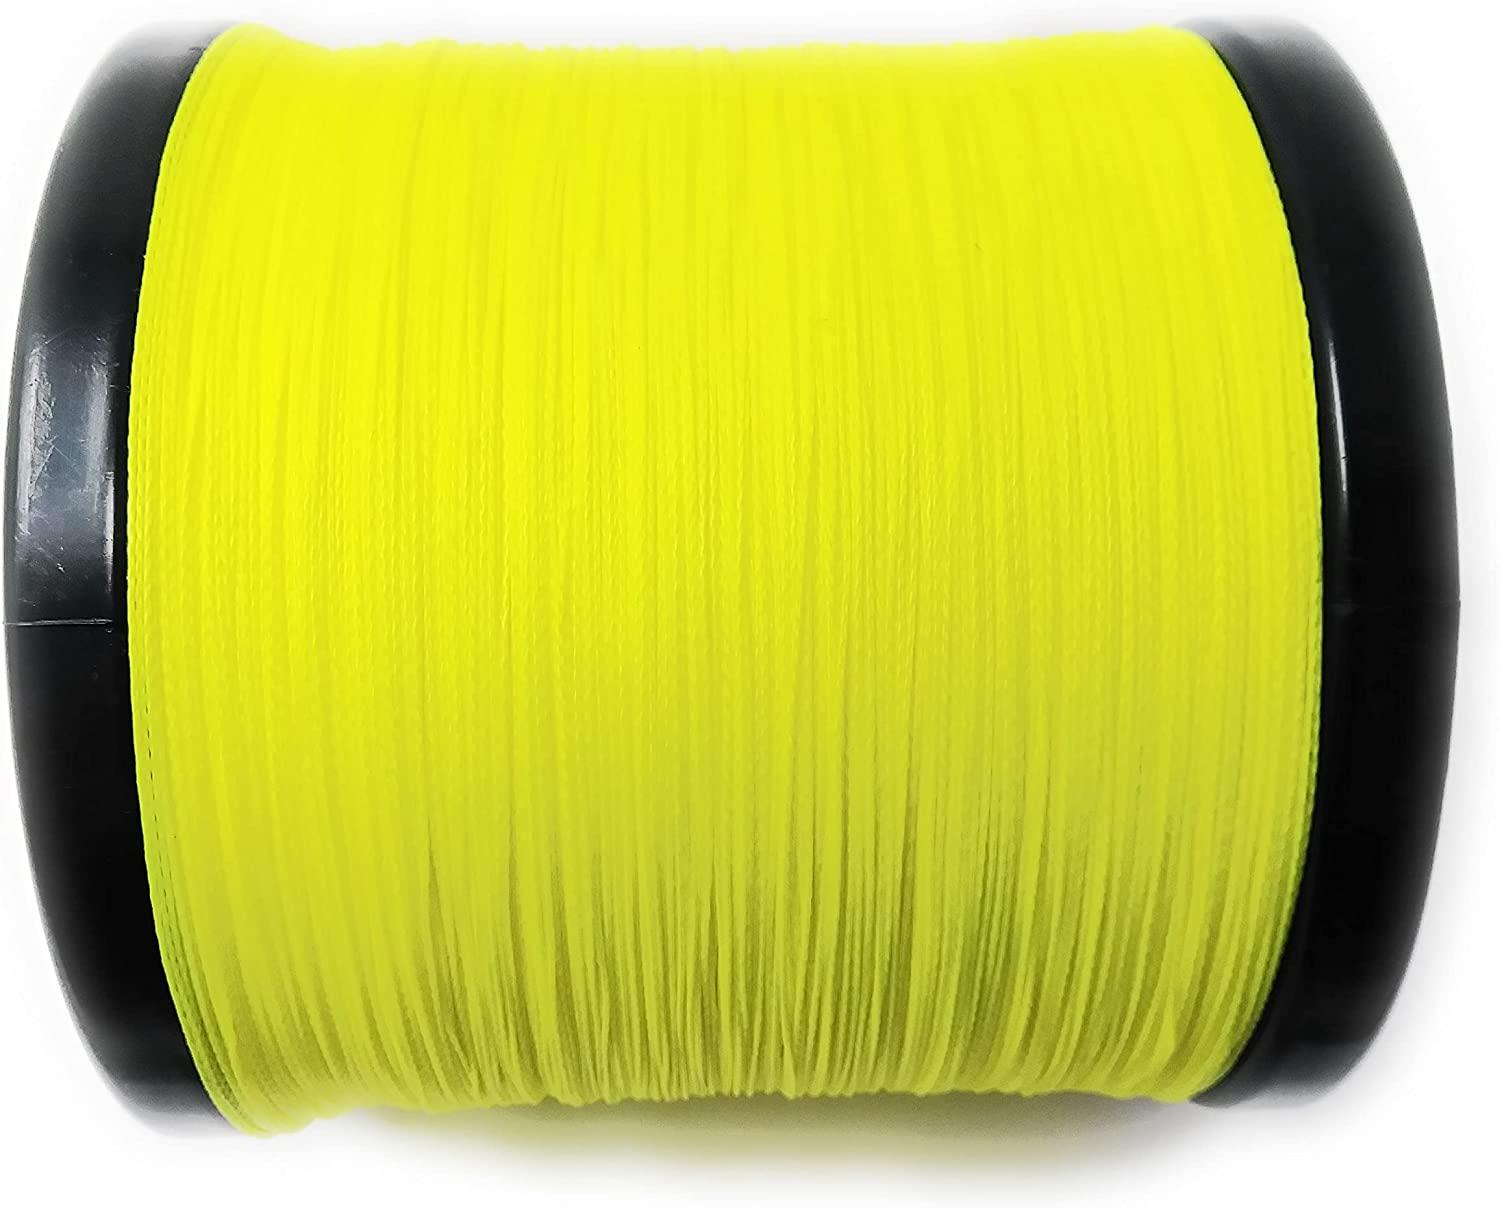 WFT Gliss KG Monotex line 150m, braided cord, sea line, fishing line,  braided cord, yellow : : Sports & Outdoors